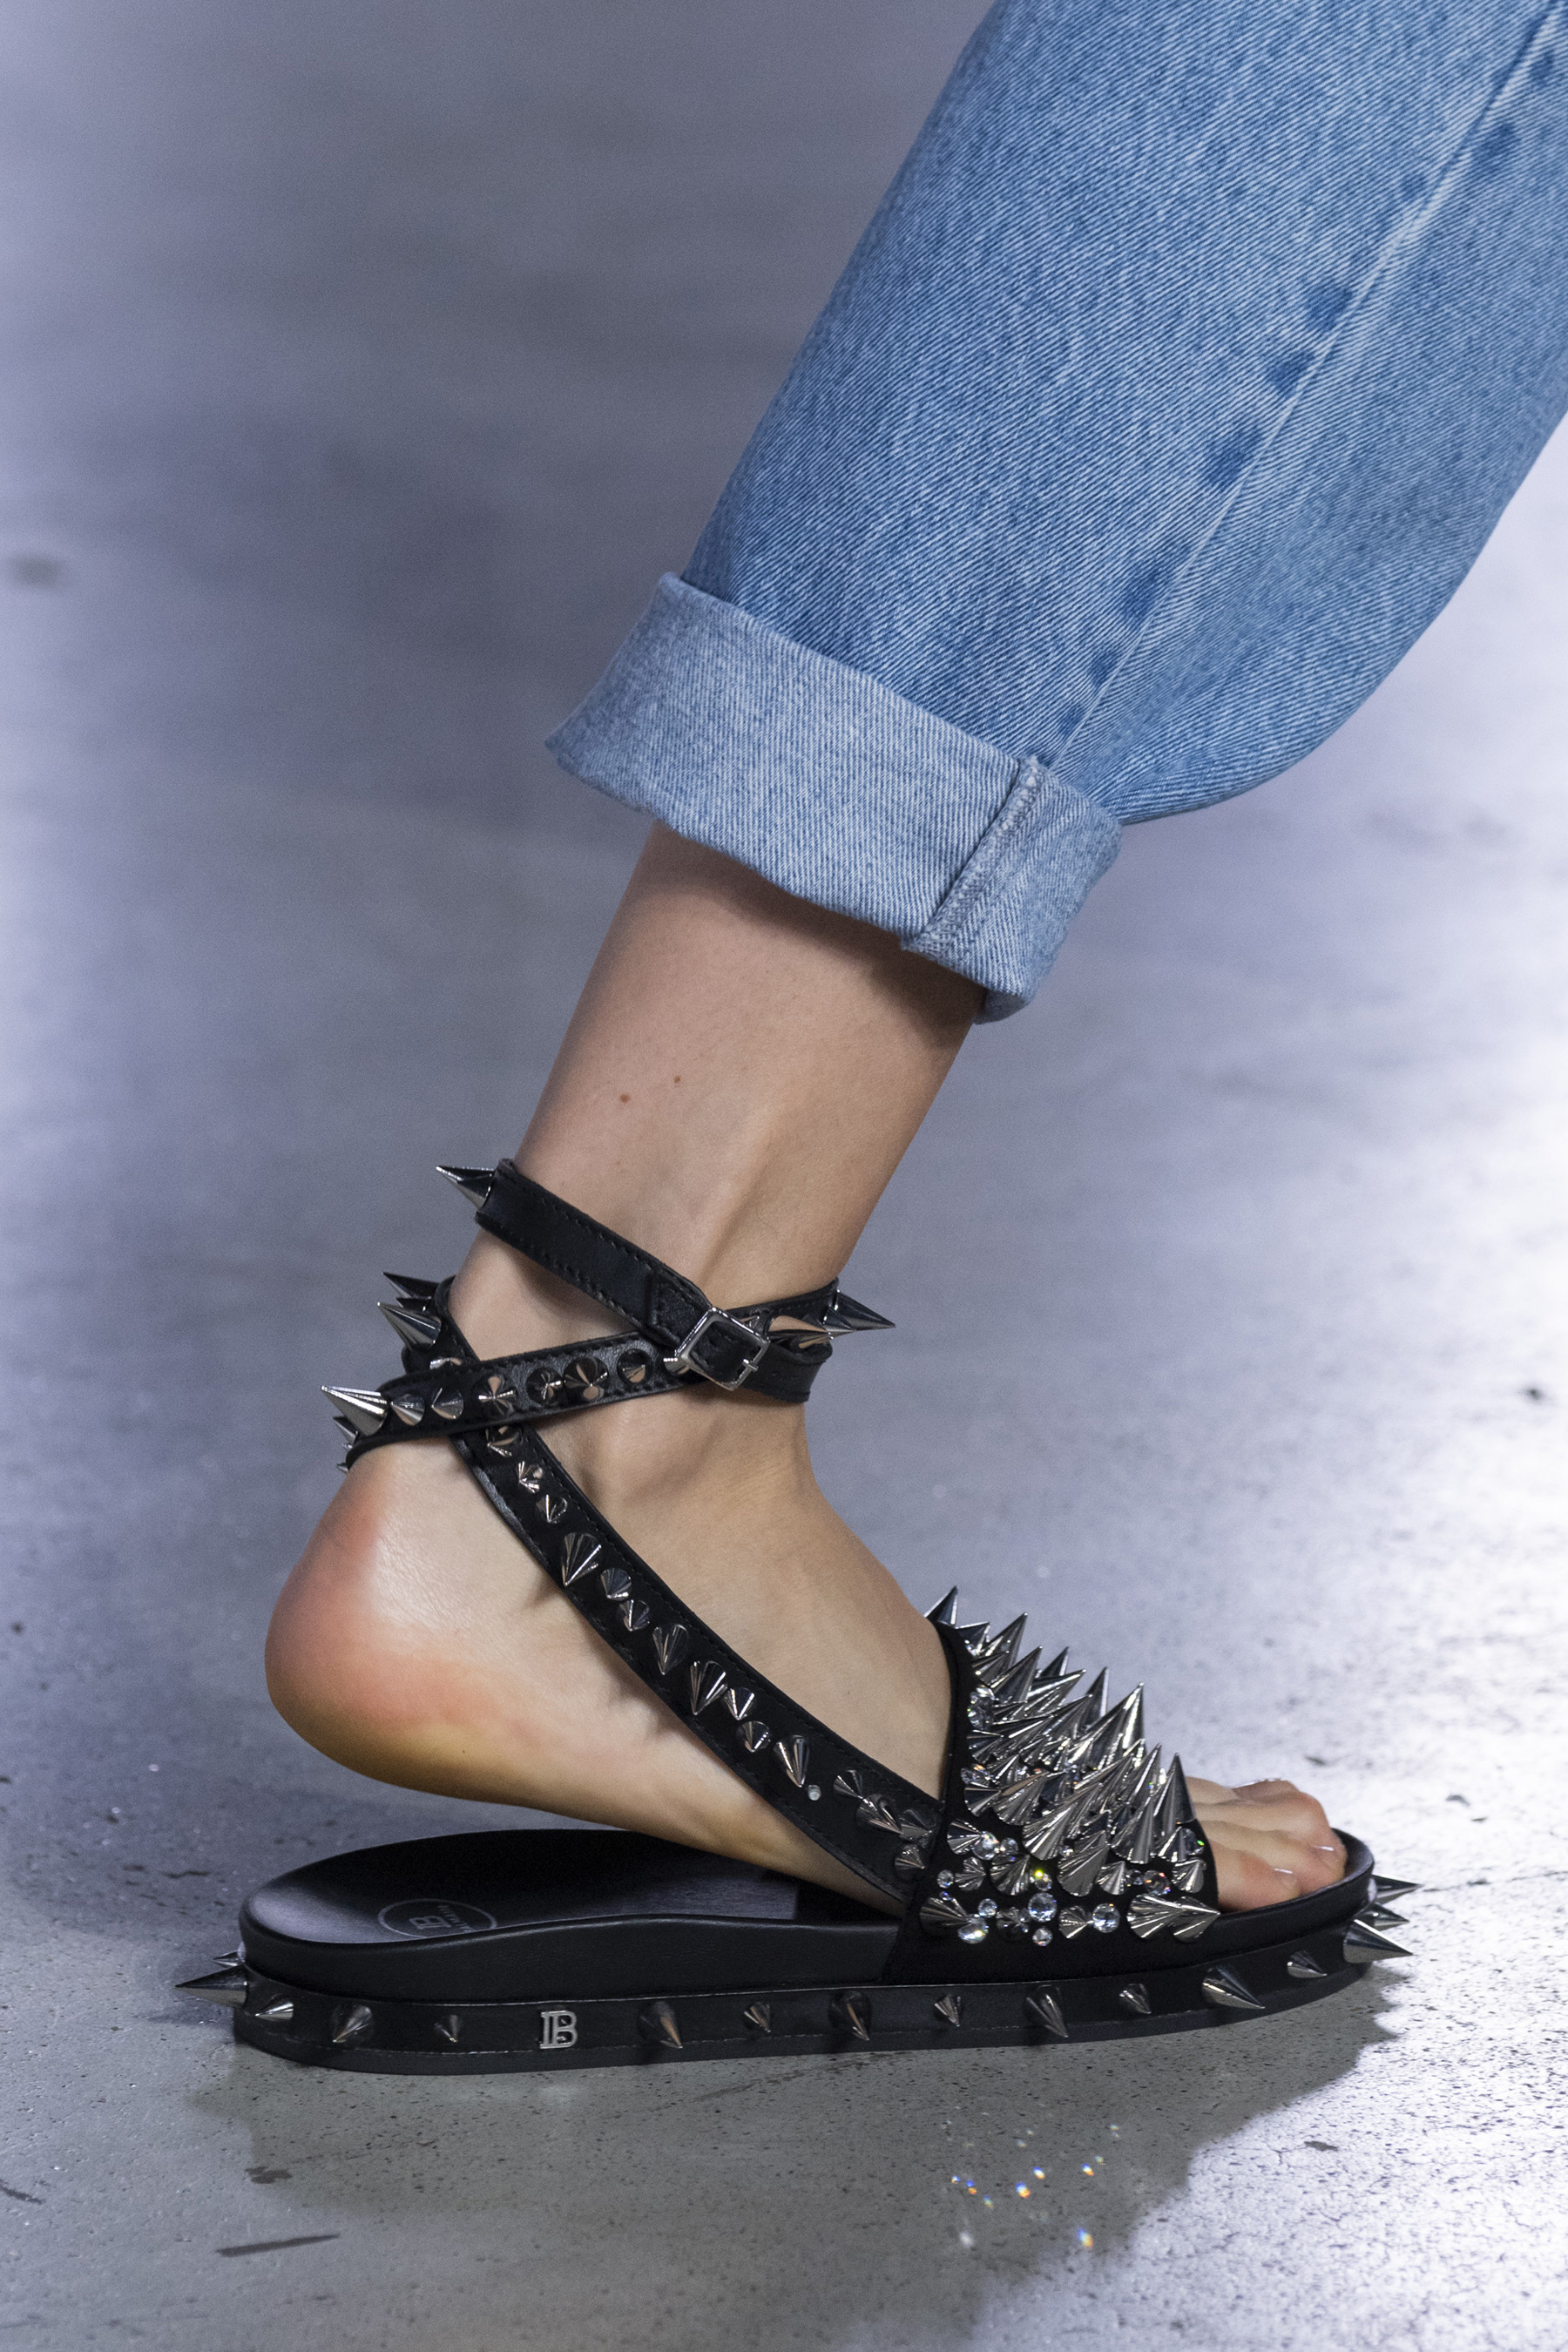 Best Shoes at Paris Fashion Week Fall 2019 | The Impression